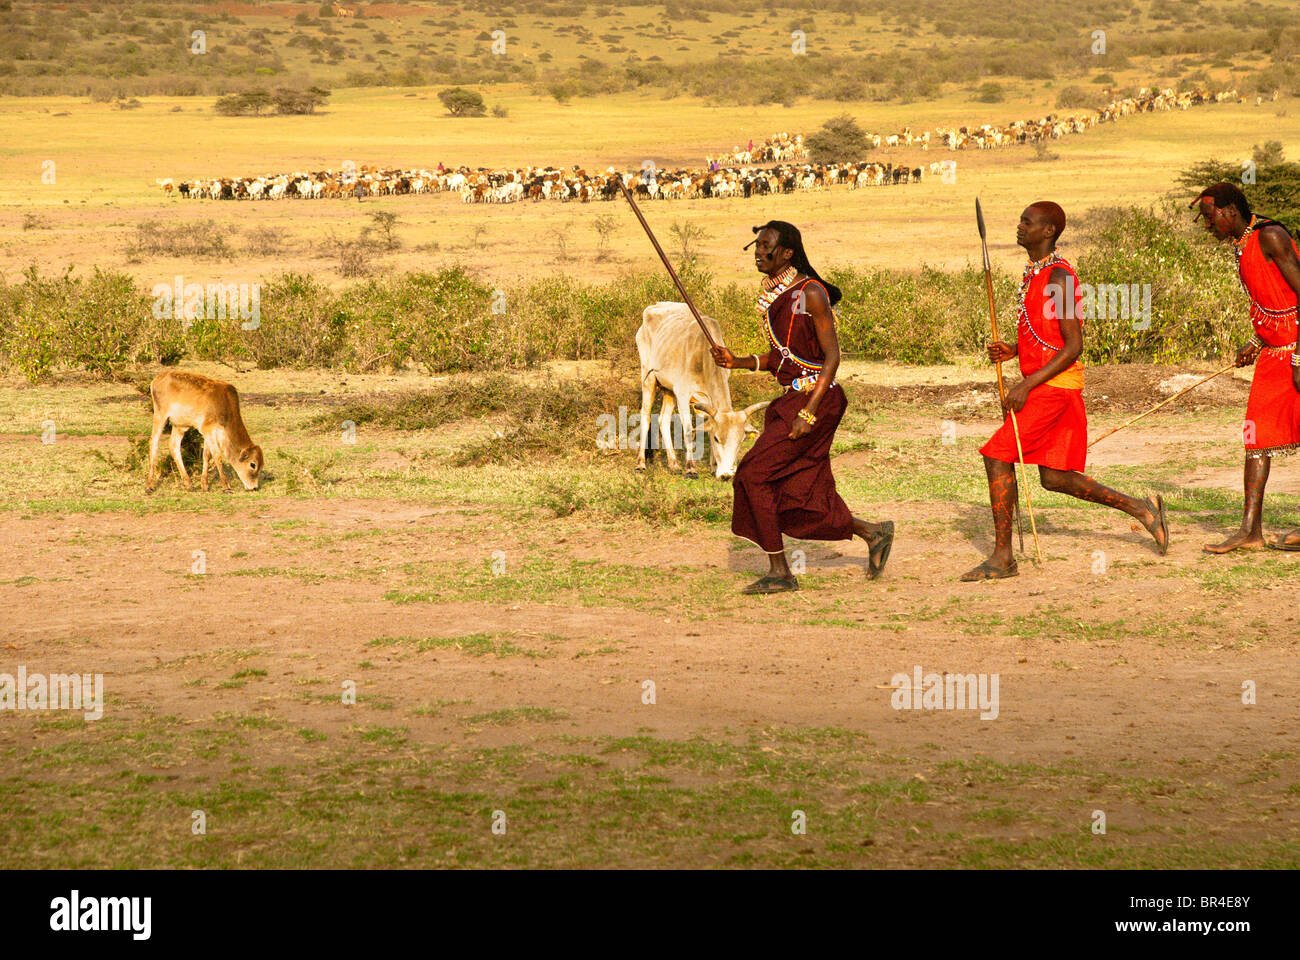 Masai men doing a welcome dance with cattle in the background, Masai Mara, Kenya, Africa Stock Photo